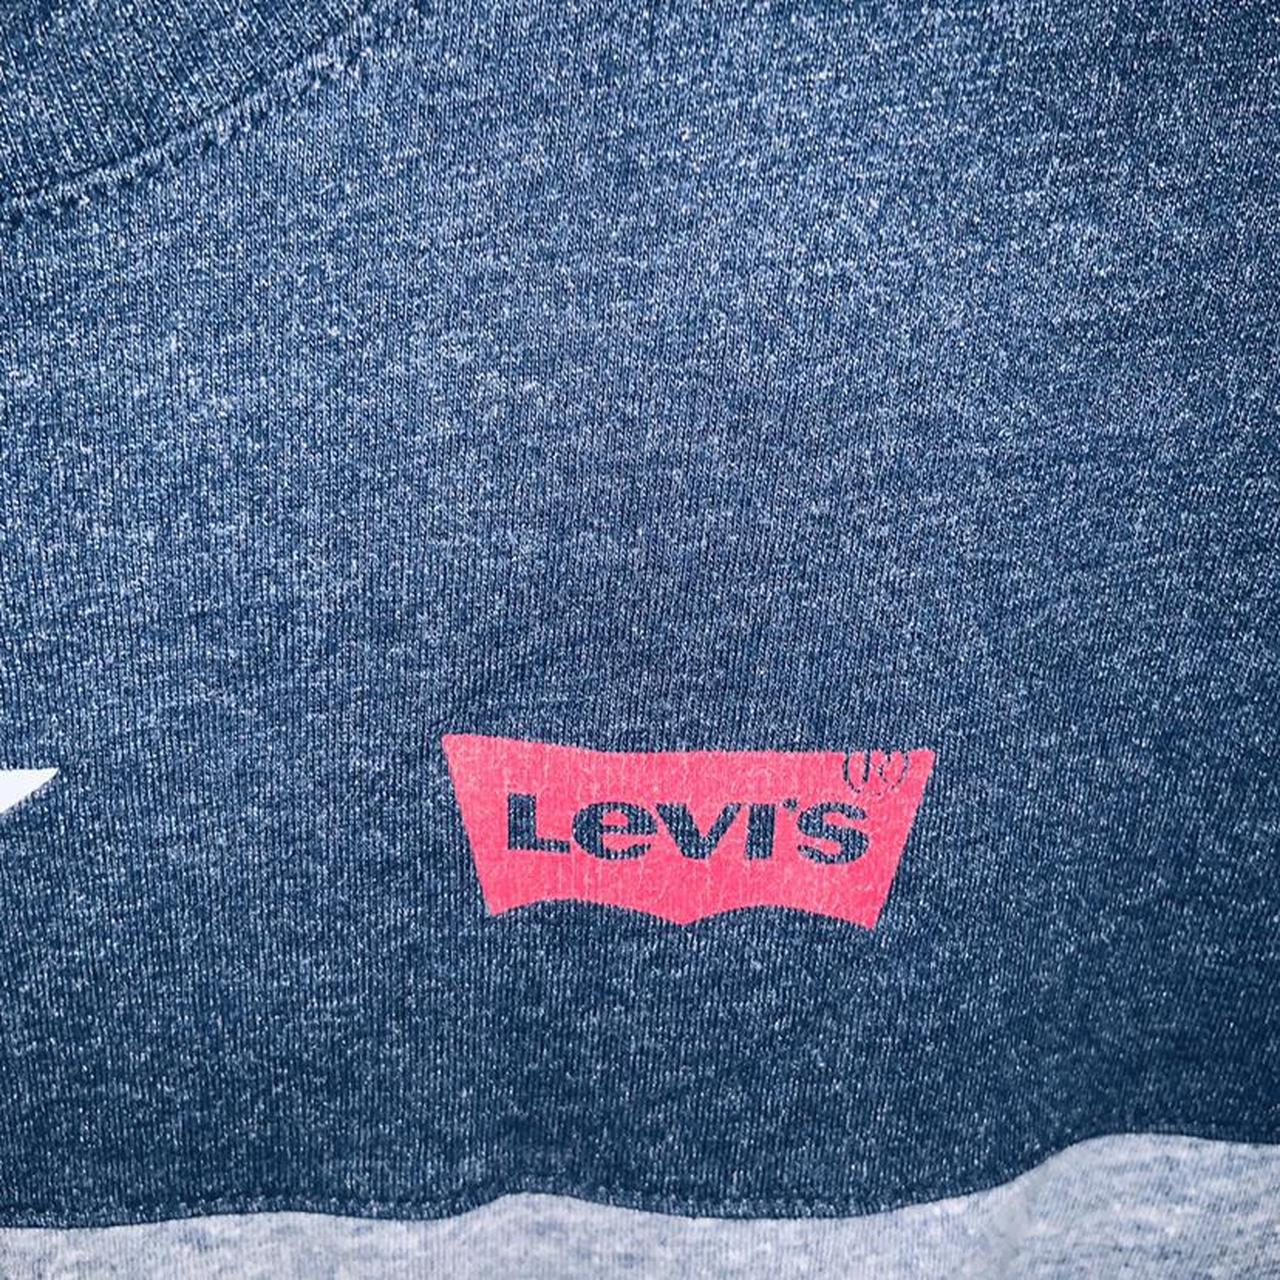 Levi’s America flag t shirt with stars and cut and... - Depop